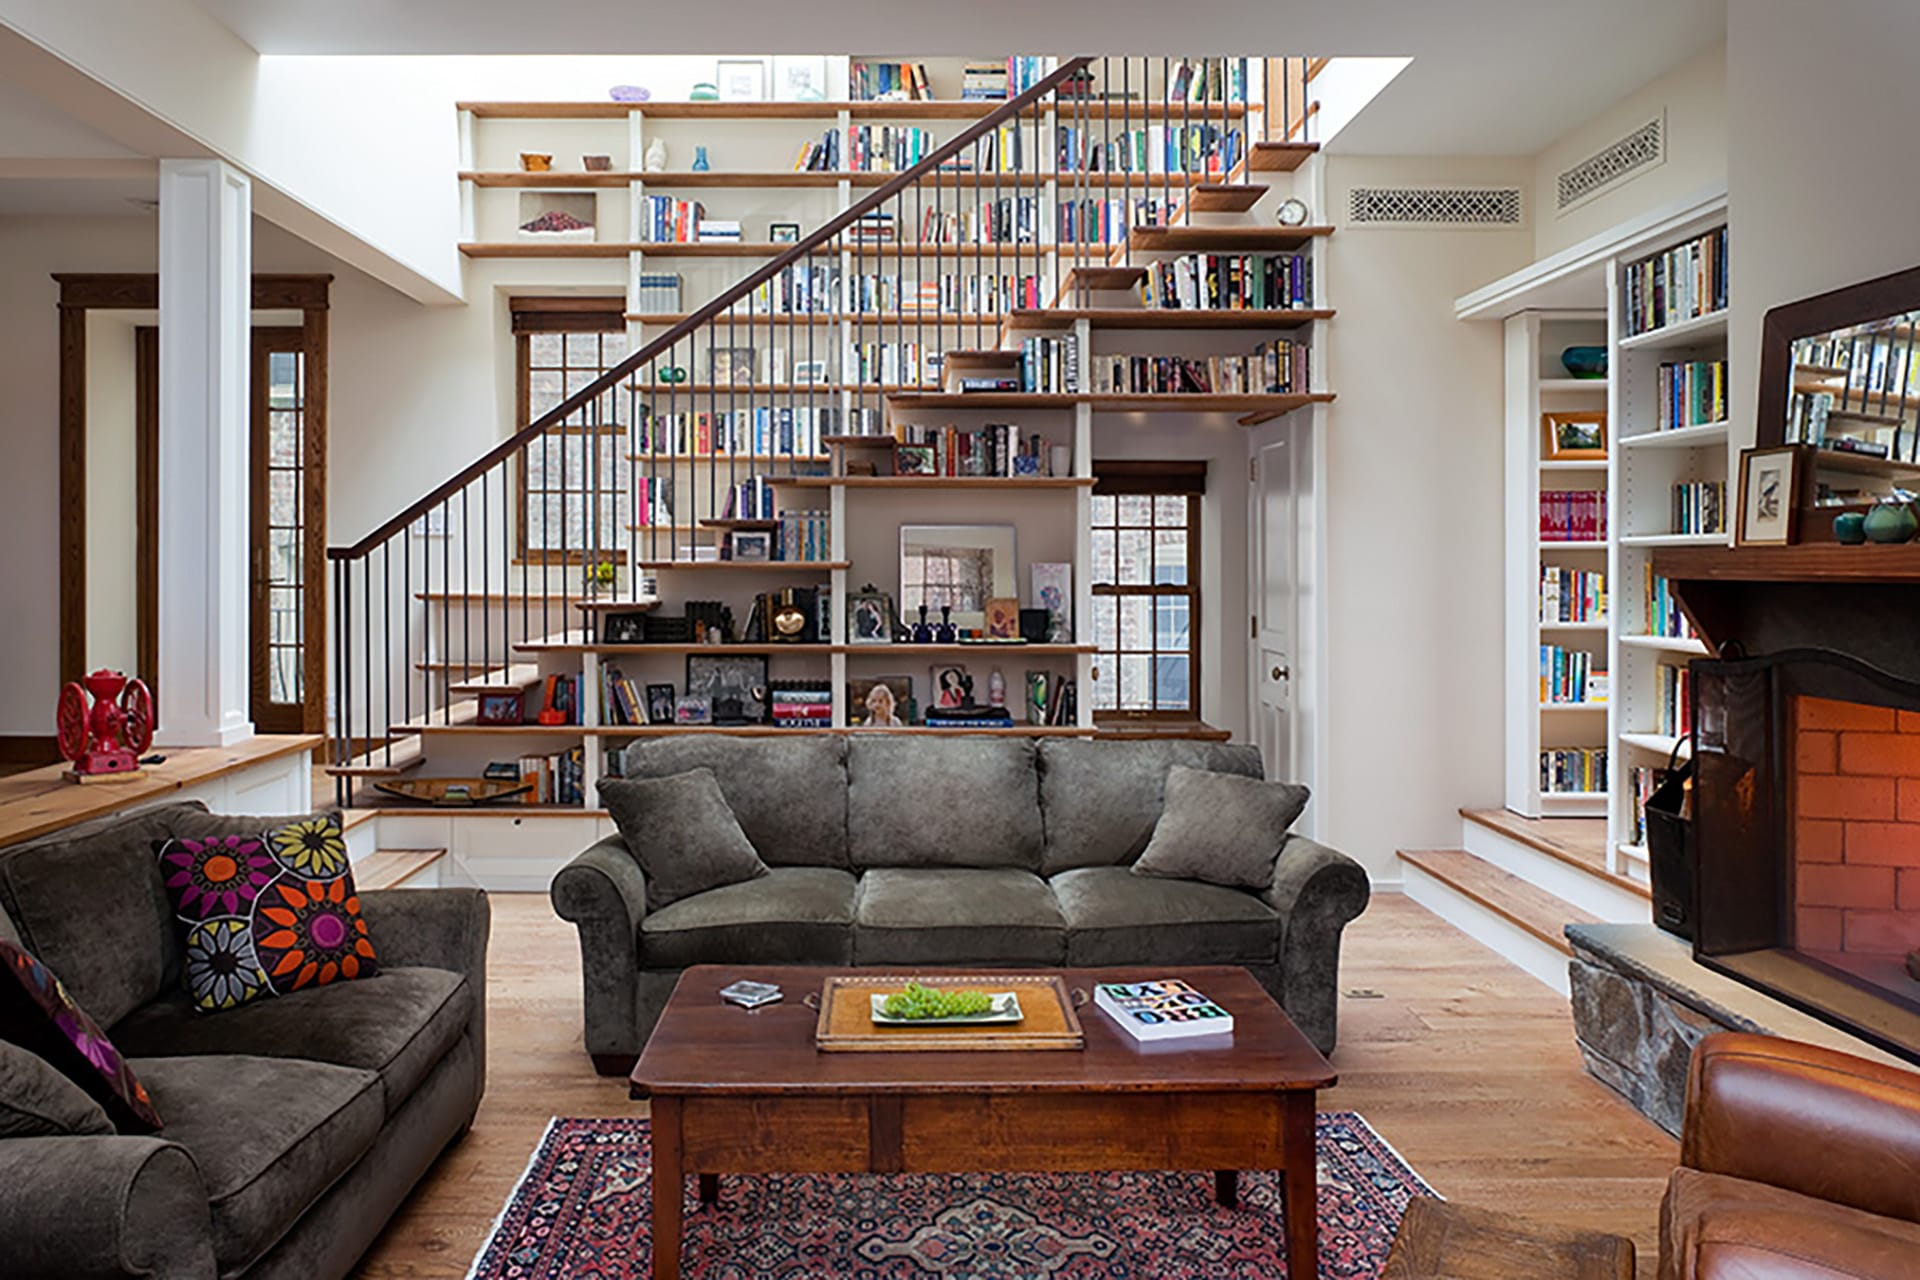 Living area in front of an open staircase lined with bookshelves.